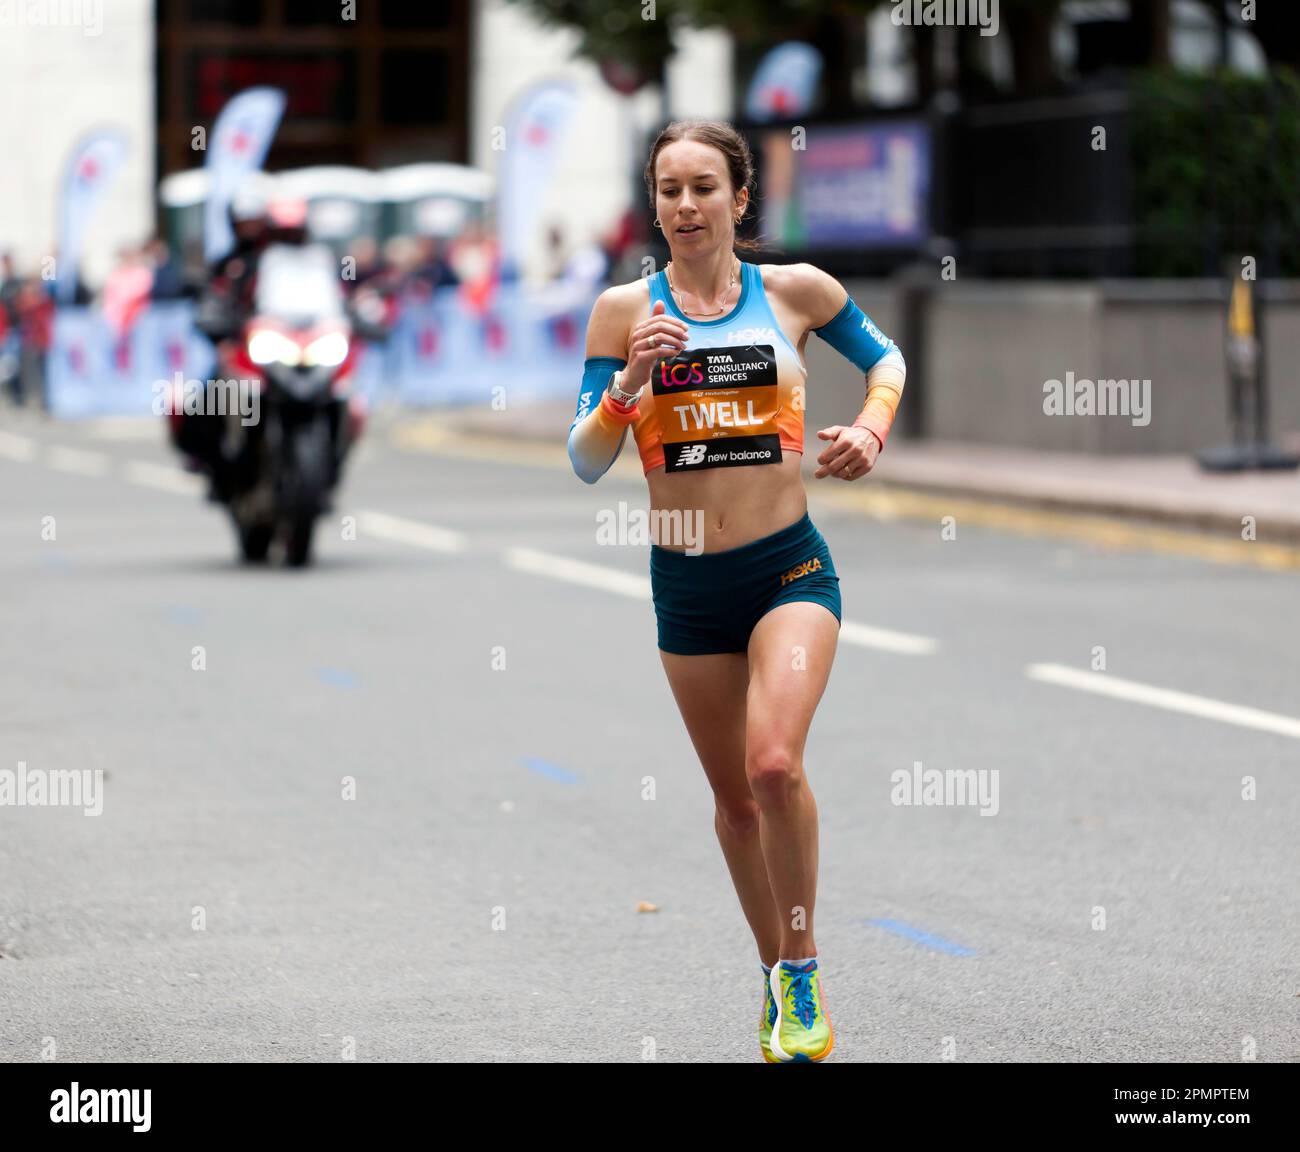 Stephanie Twell, passing through Cabot Square, on her way to finish 12th in the Women's Elite Race, during the 2022 London Marathon. Stock Photo